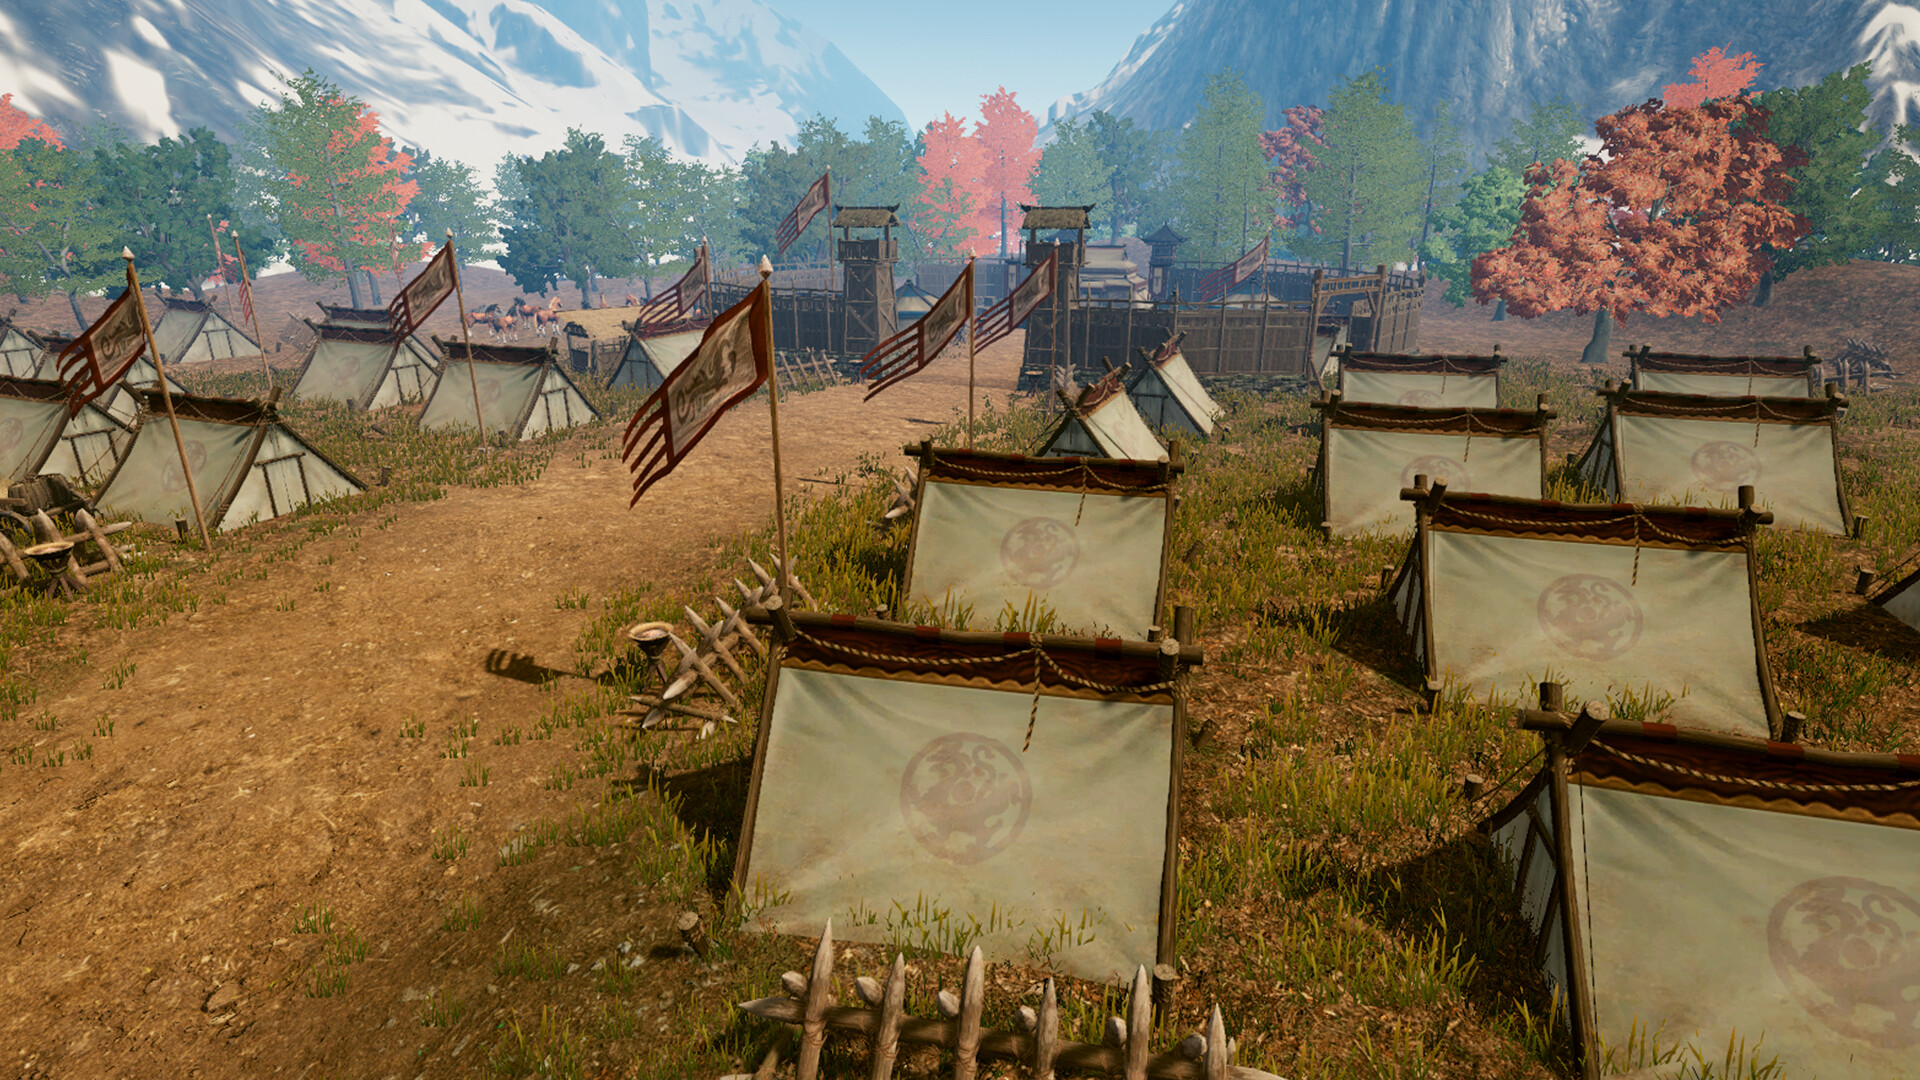 Tents in game